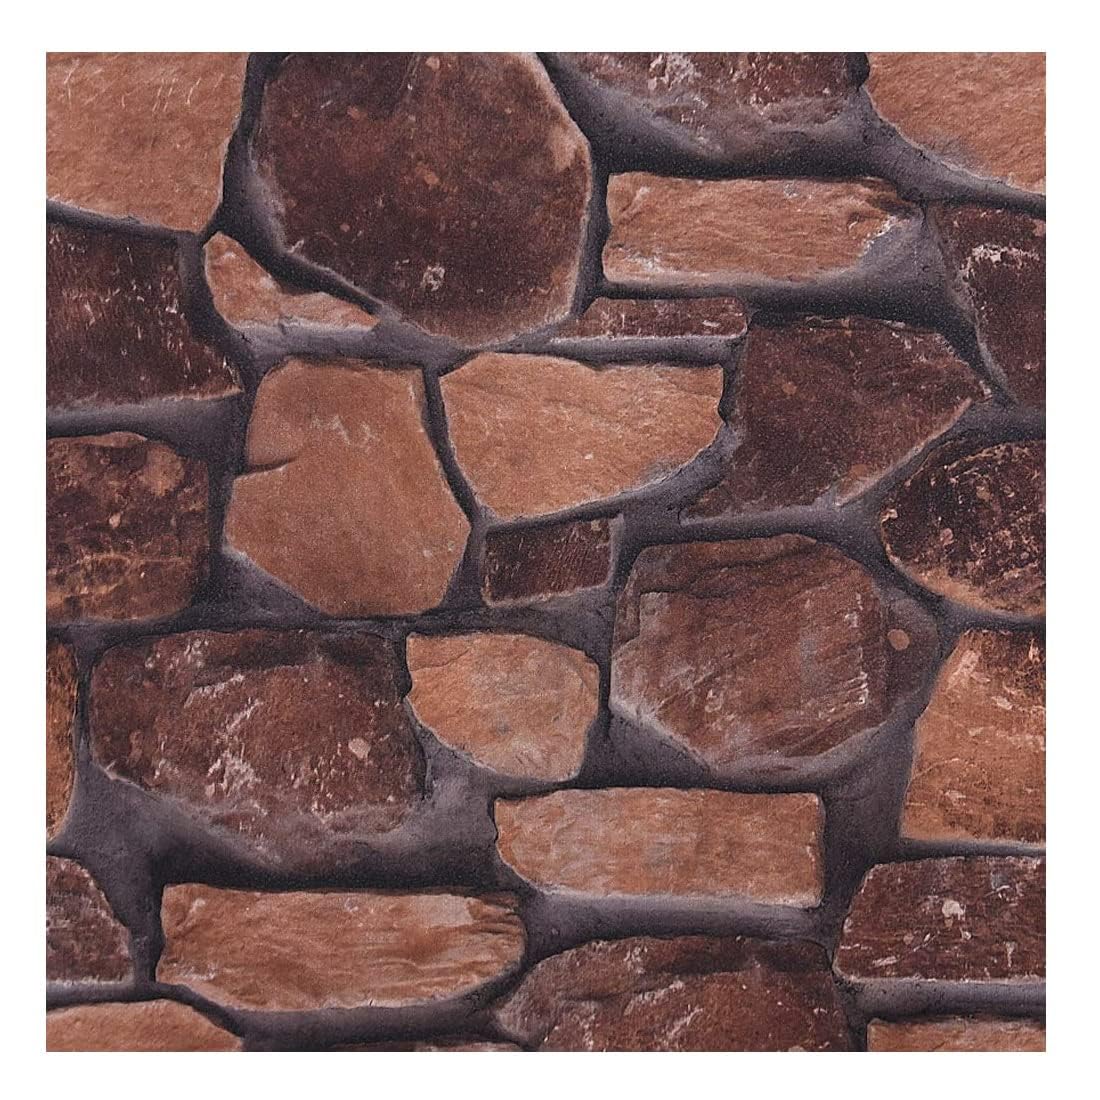 3D Latest Stone Design Dark Brown Wallpaper Roll for Home Walls 57 Sq Ft (0.53m or 21 Inches x 10m or 33 Feet)